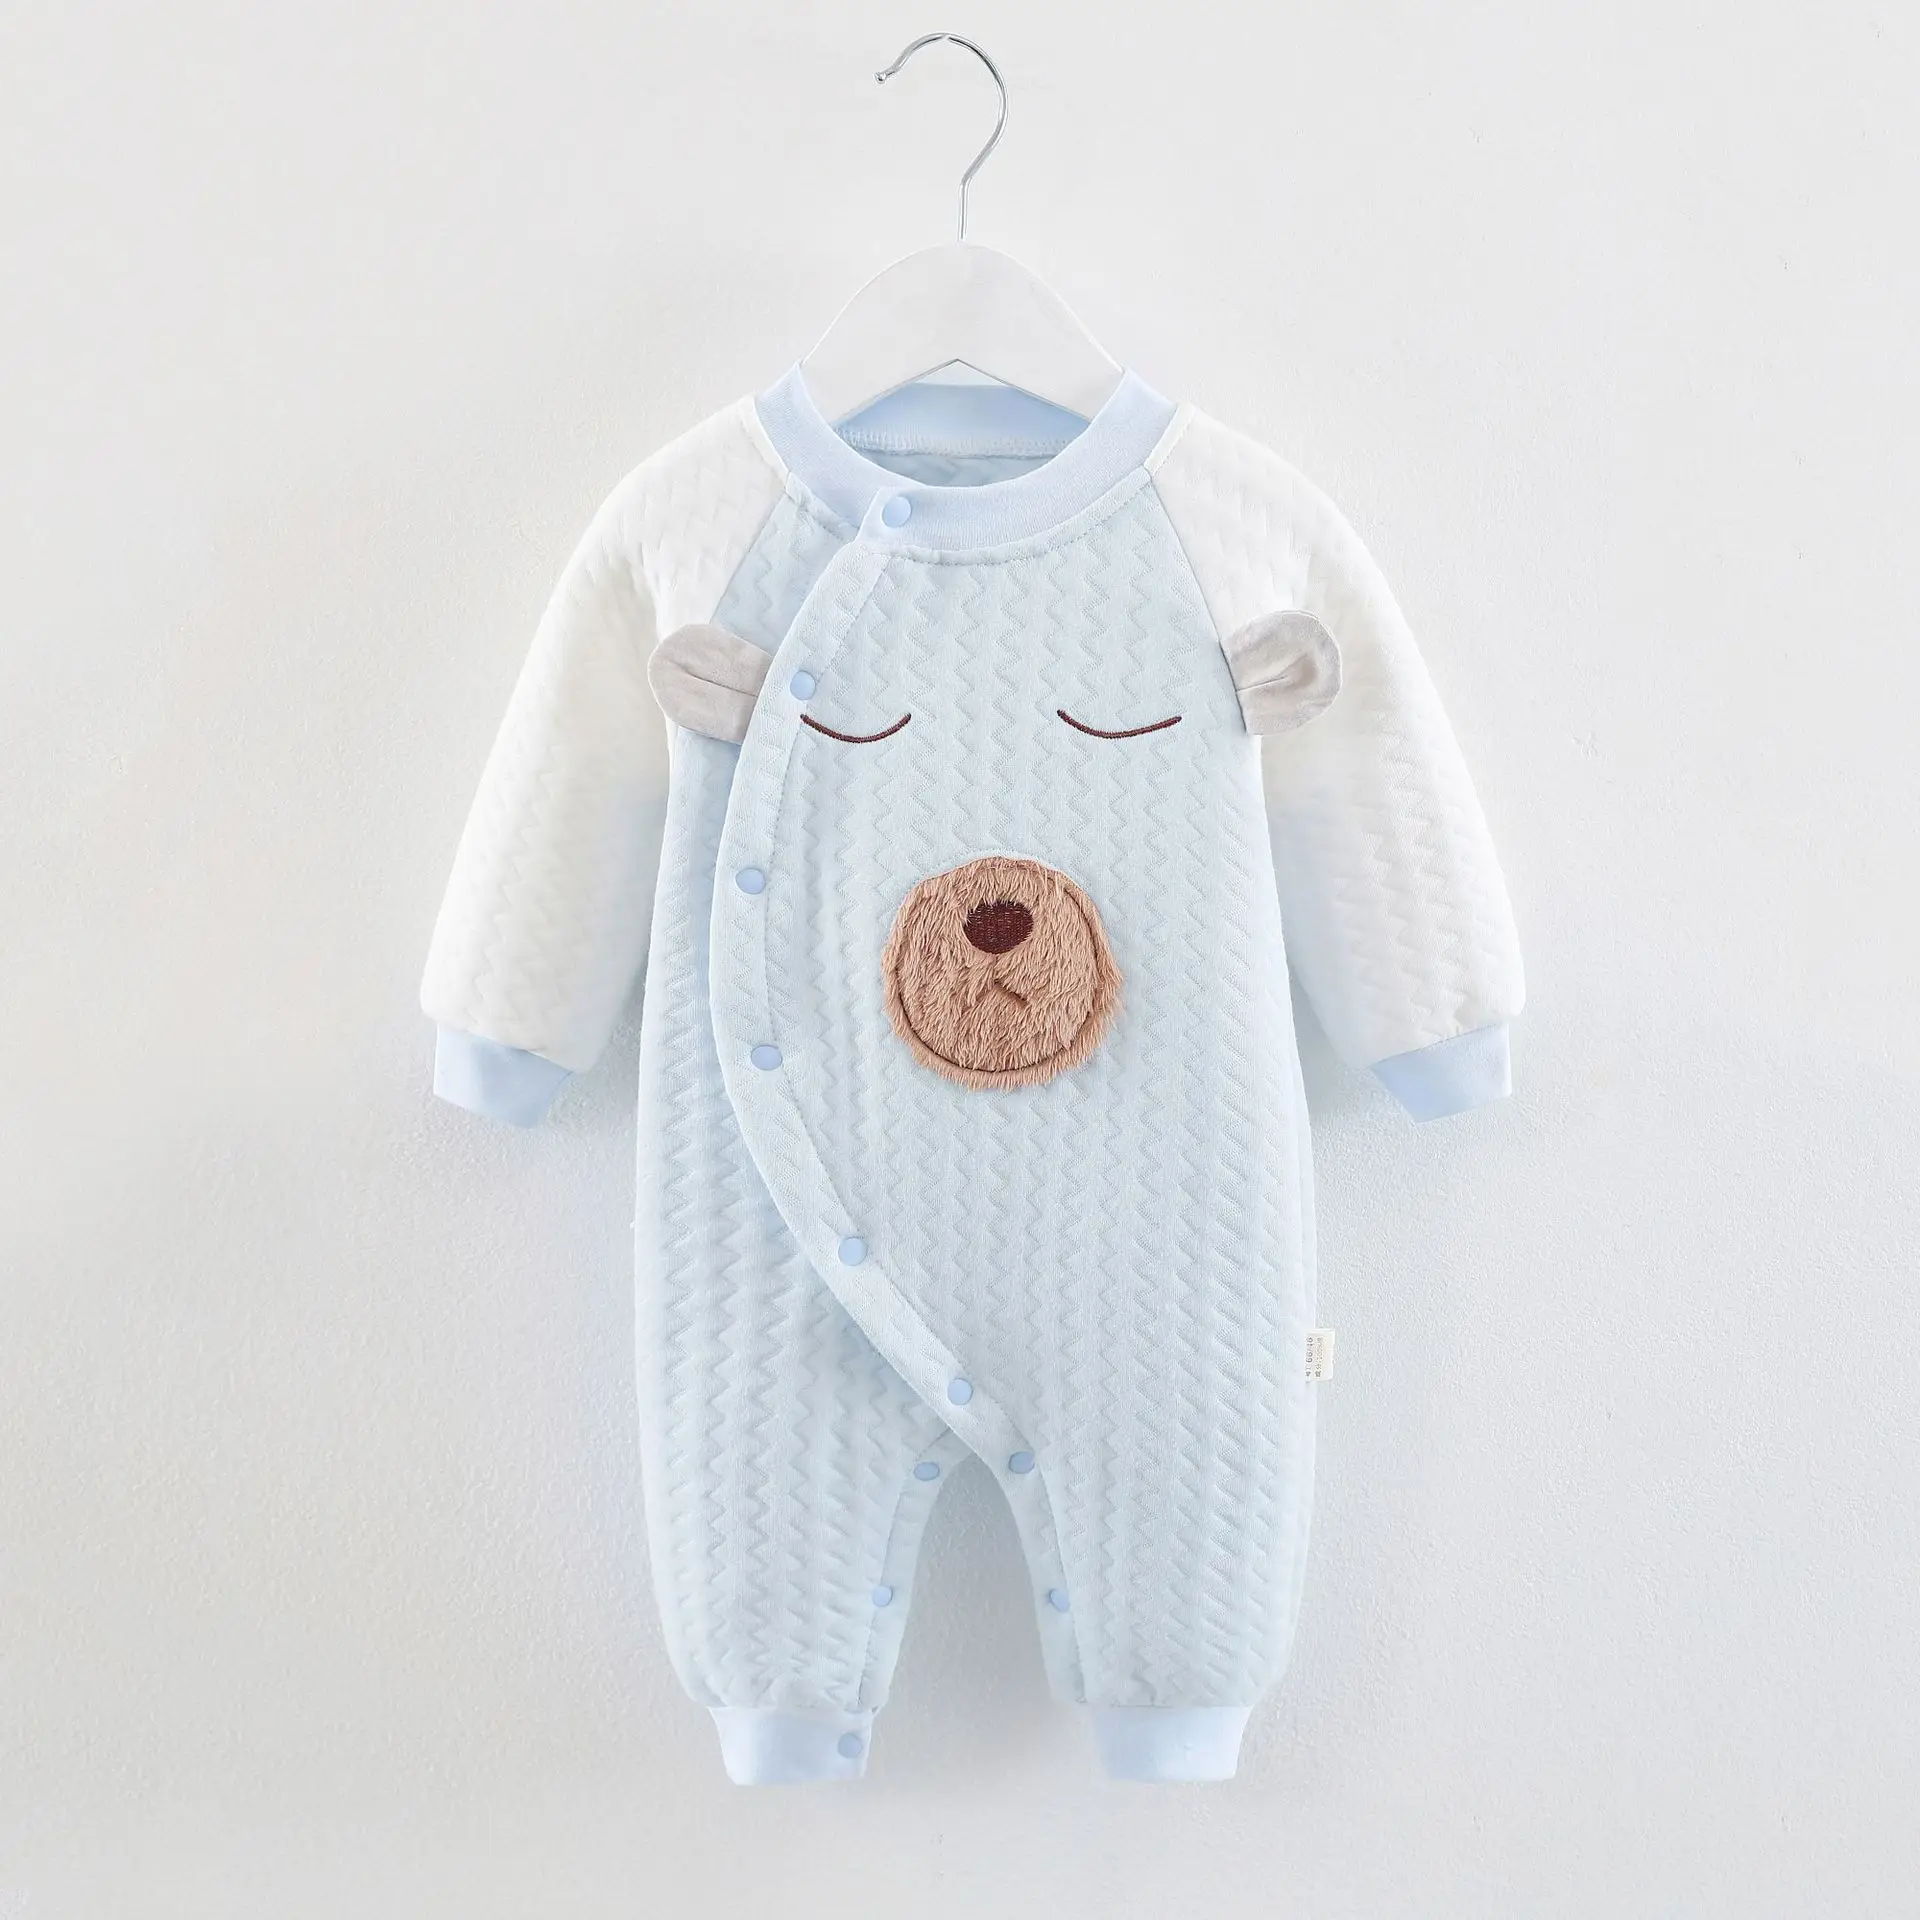 

Newborn Baby Girl Romper Winter Warm Infant Jumpsuit Thicken Toddler Climbing Playsuit Children Clothing Overalls Outfit A708